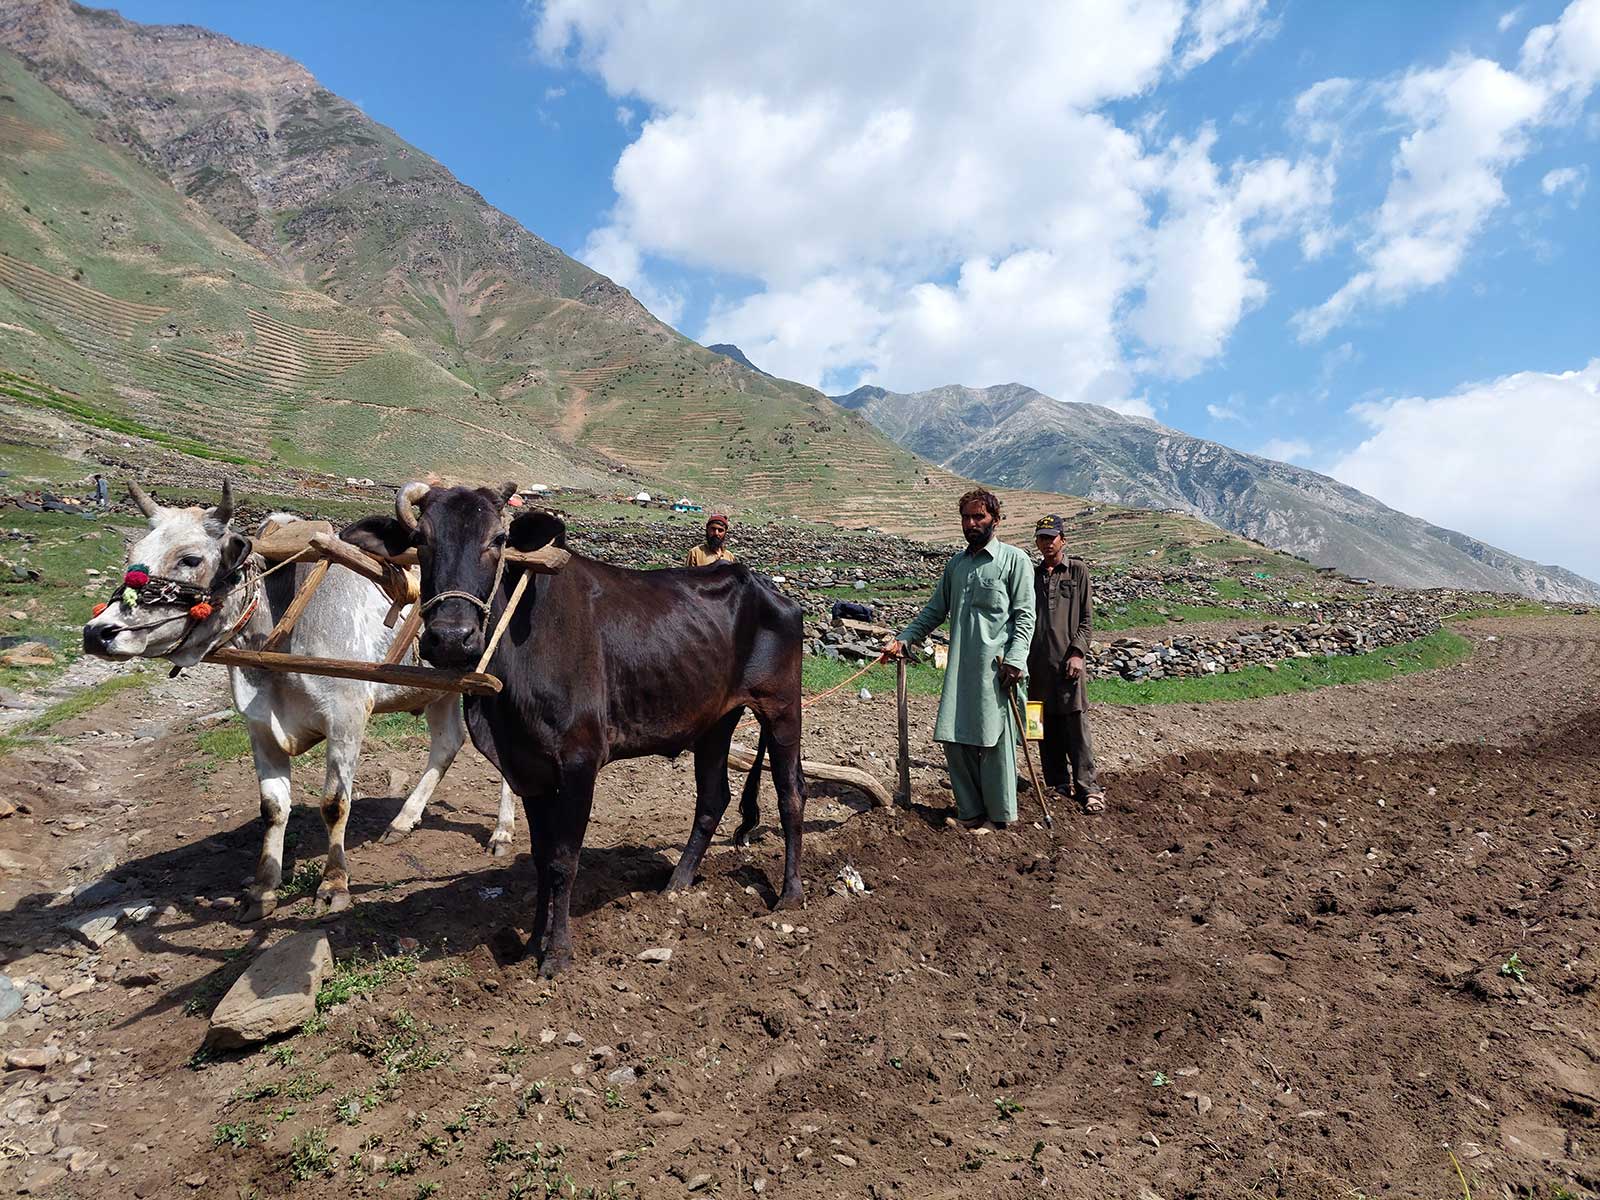 Over 40% of Pakistan’s labour force is associated with the agriculture sector and is highly vulnerable to climate change. [GIZ Pakistan]